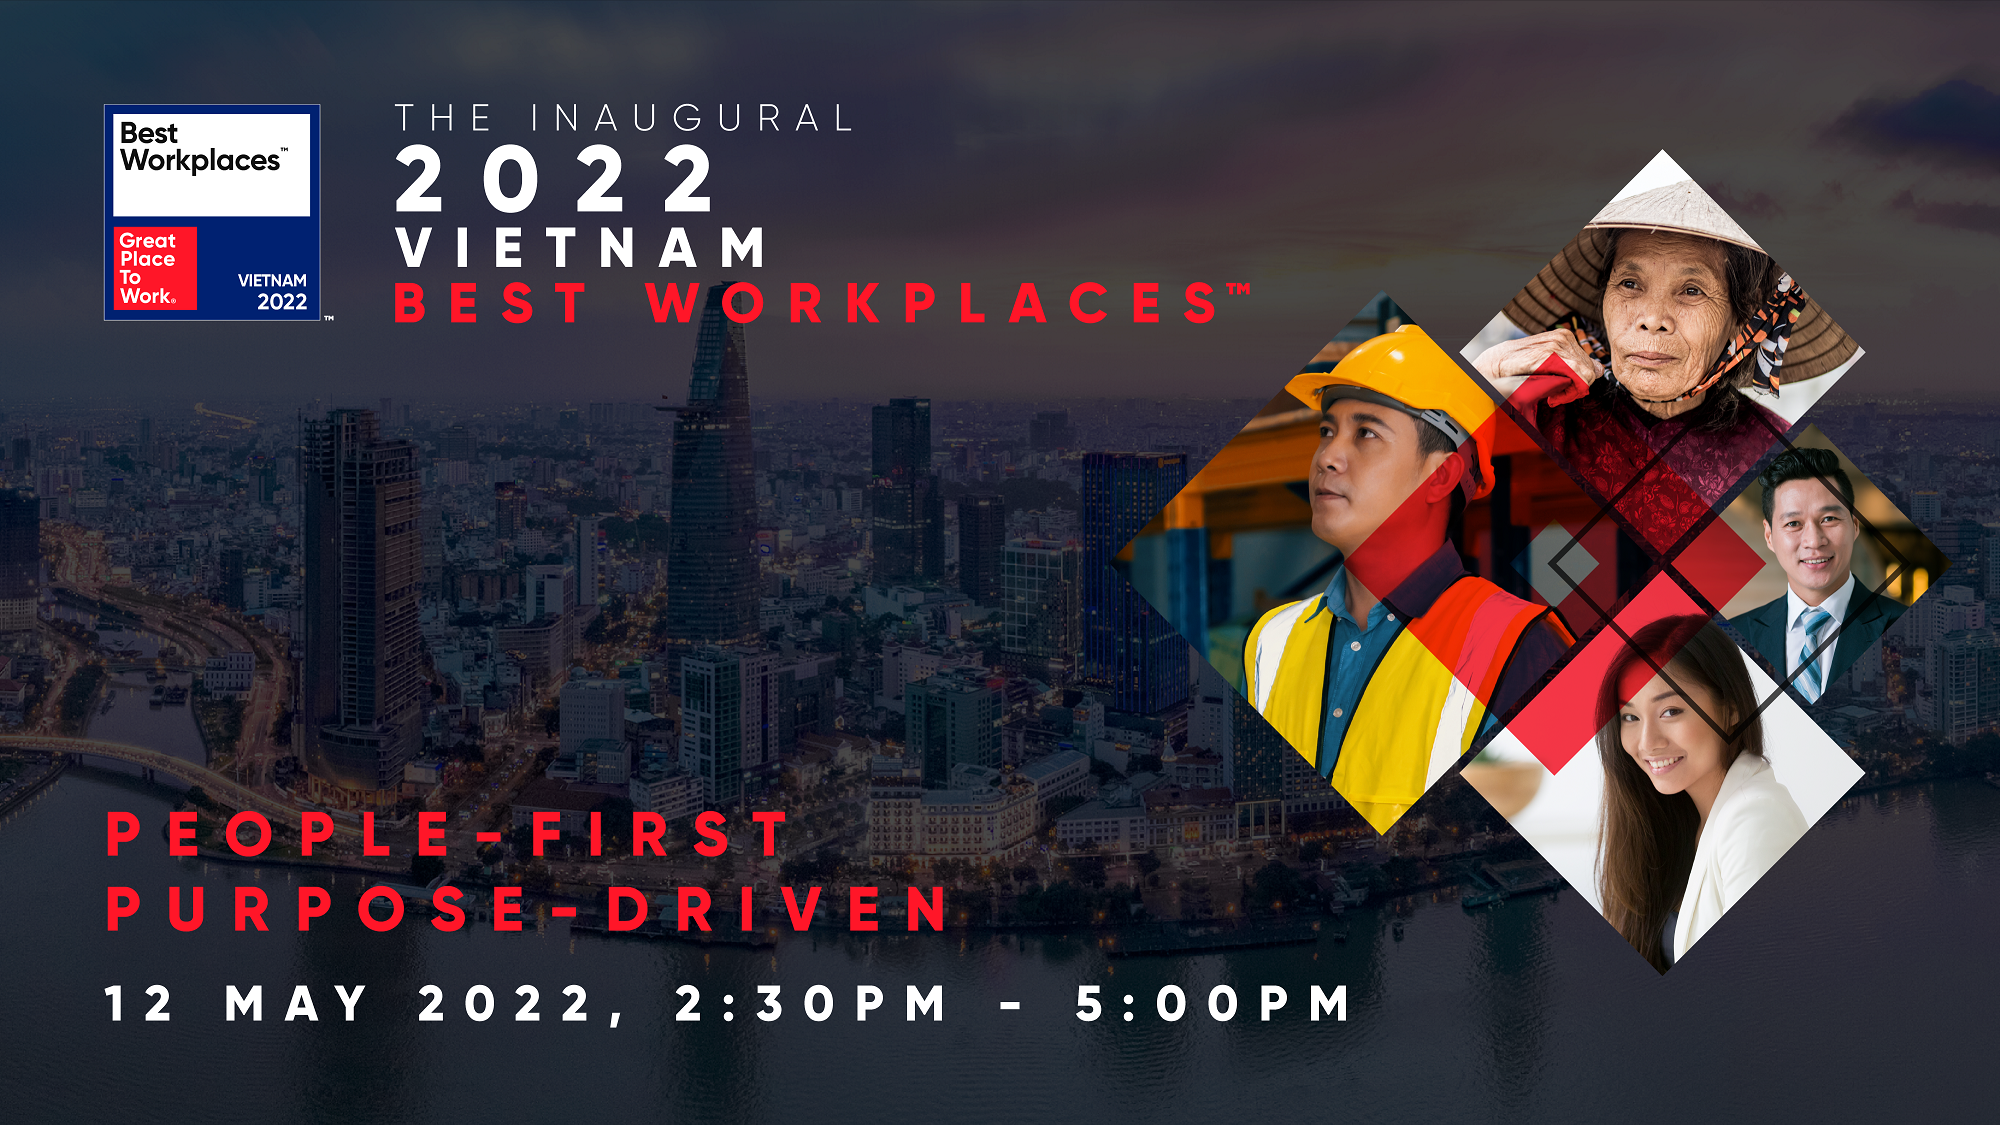 Great Place to Work Vietnam introduces Certification methodology